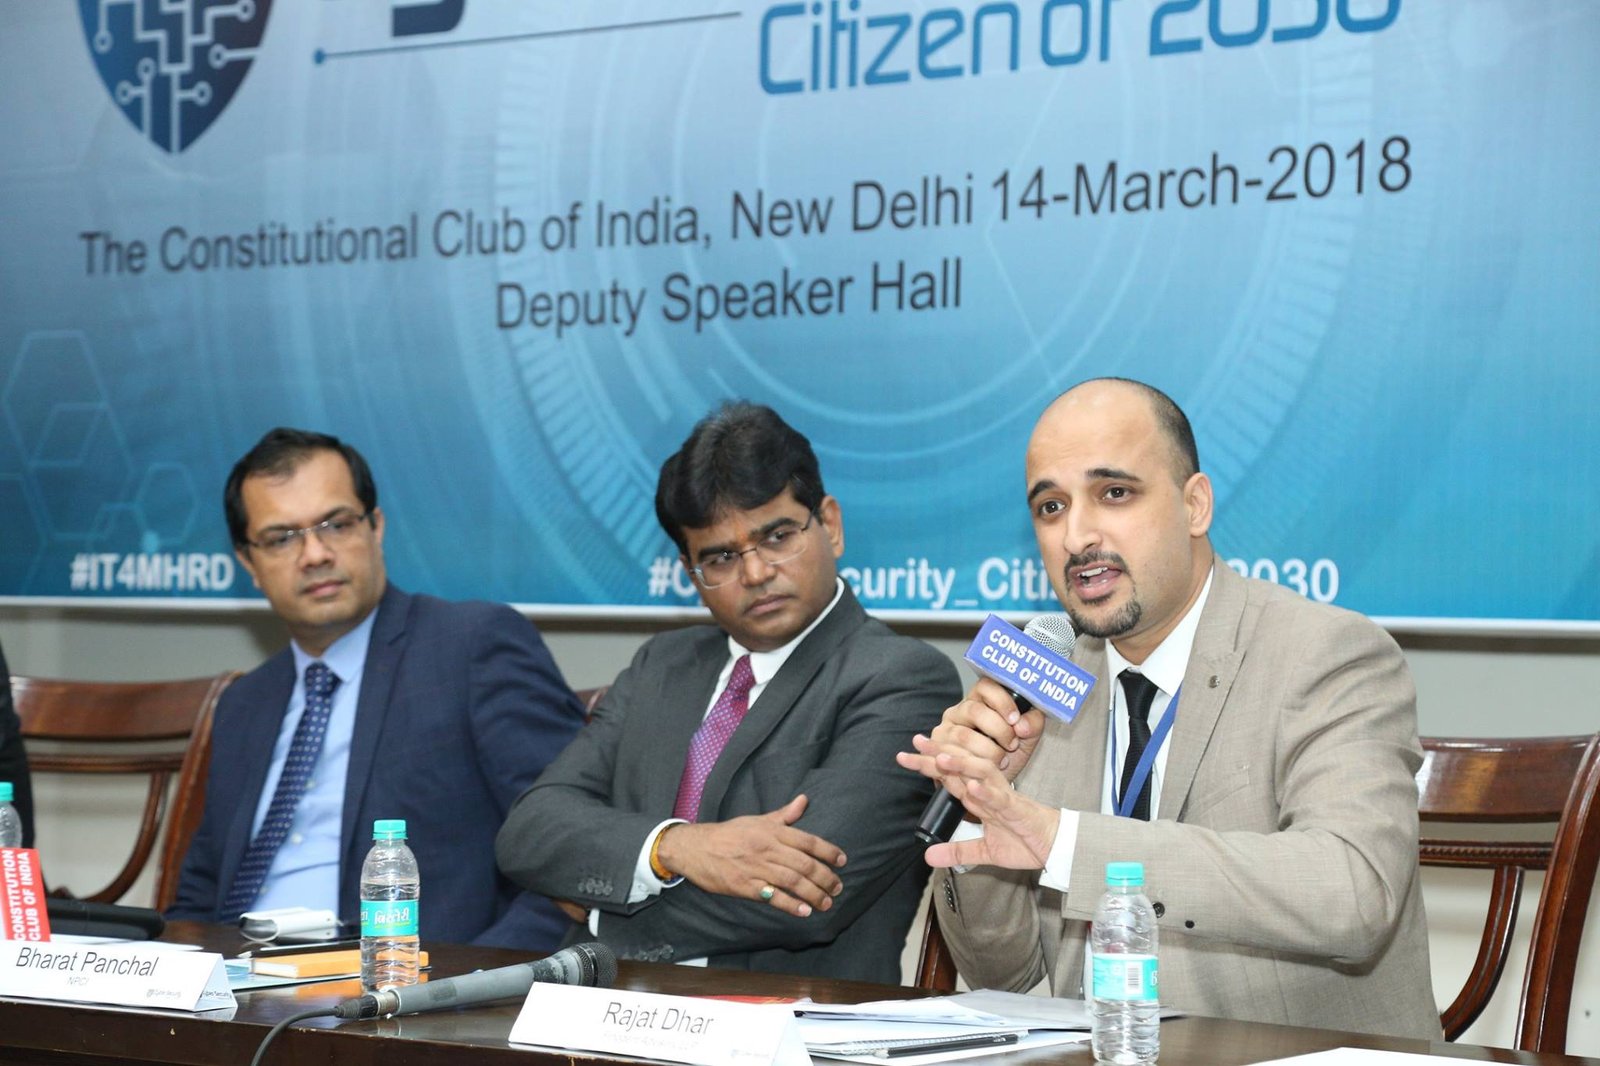 Conference on Cyber Security : Citizen of 2030